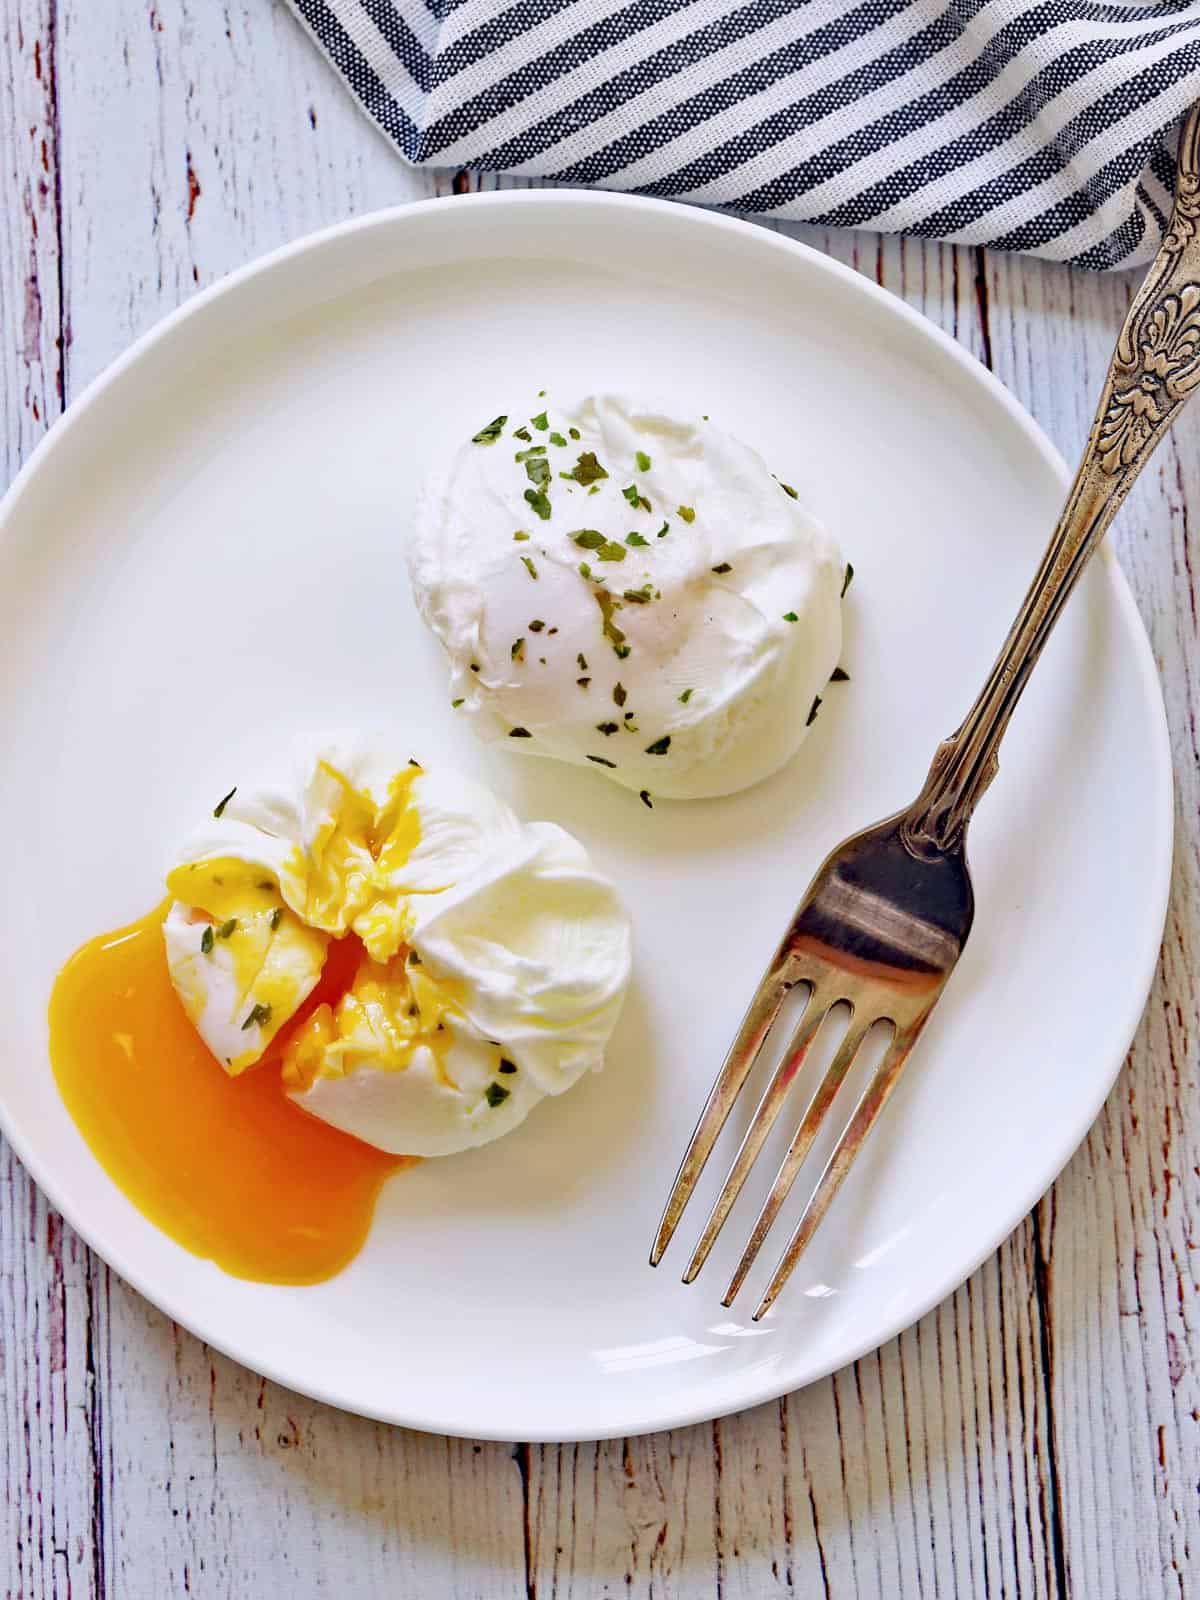 Two poached eggs on a plate with a fork.